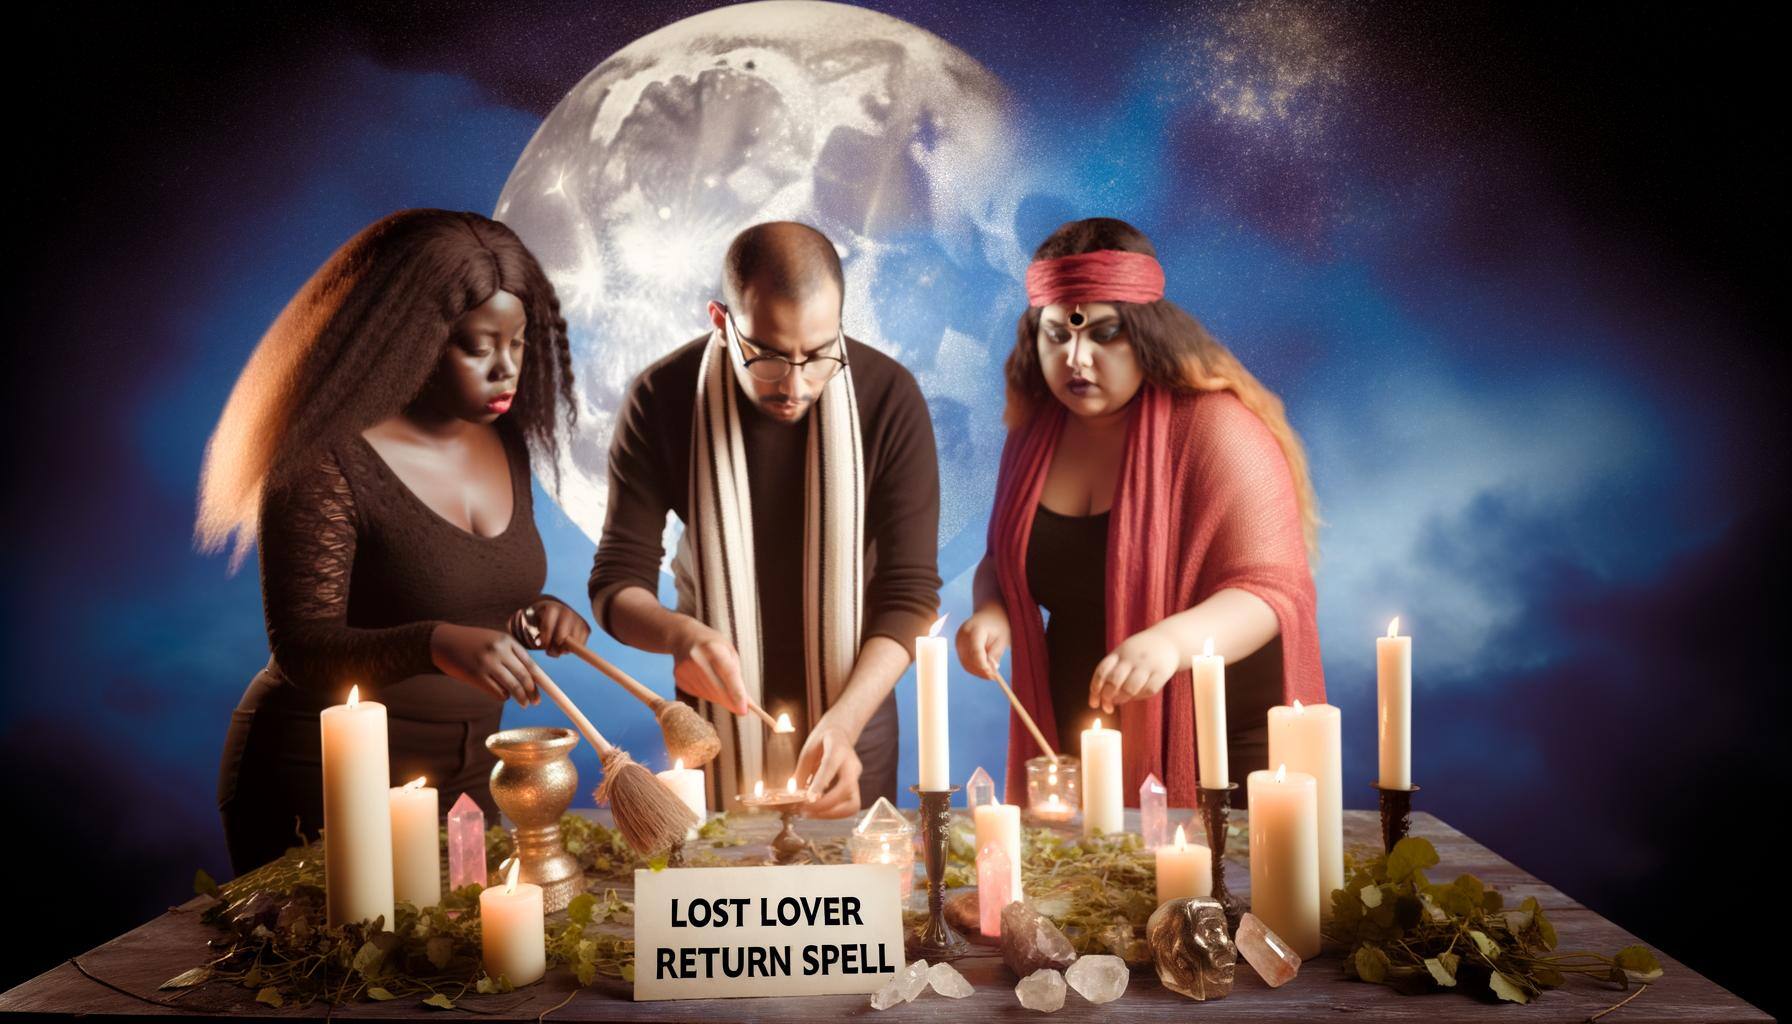 An image of a group of witches performing a coven lost lover return spell, surrounded by candles, crystals, and herbs on an altar, with a waxing moon-1